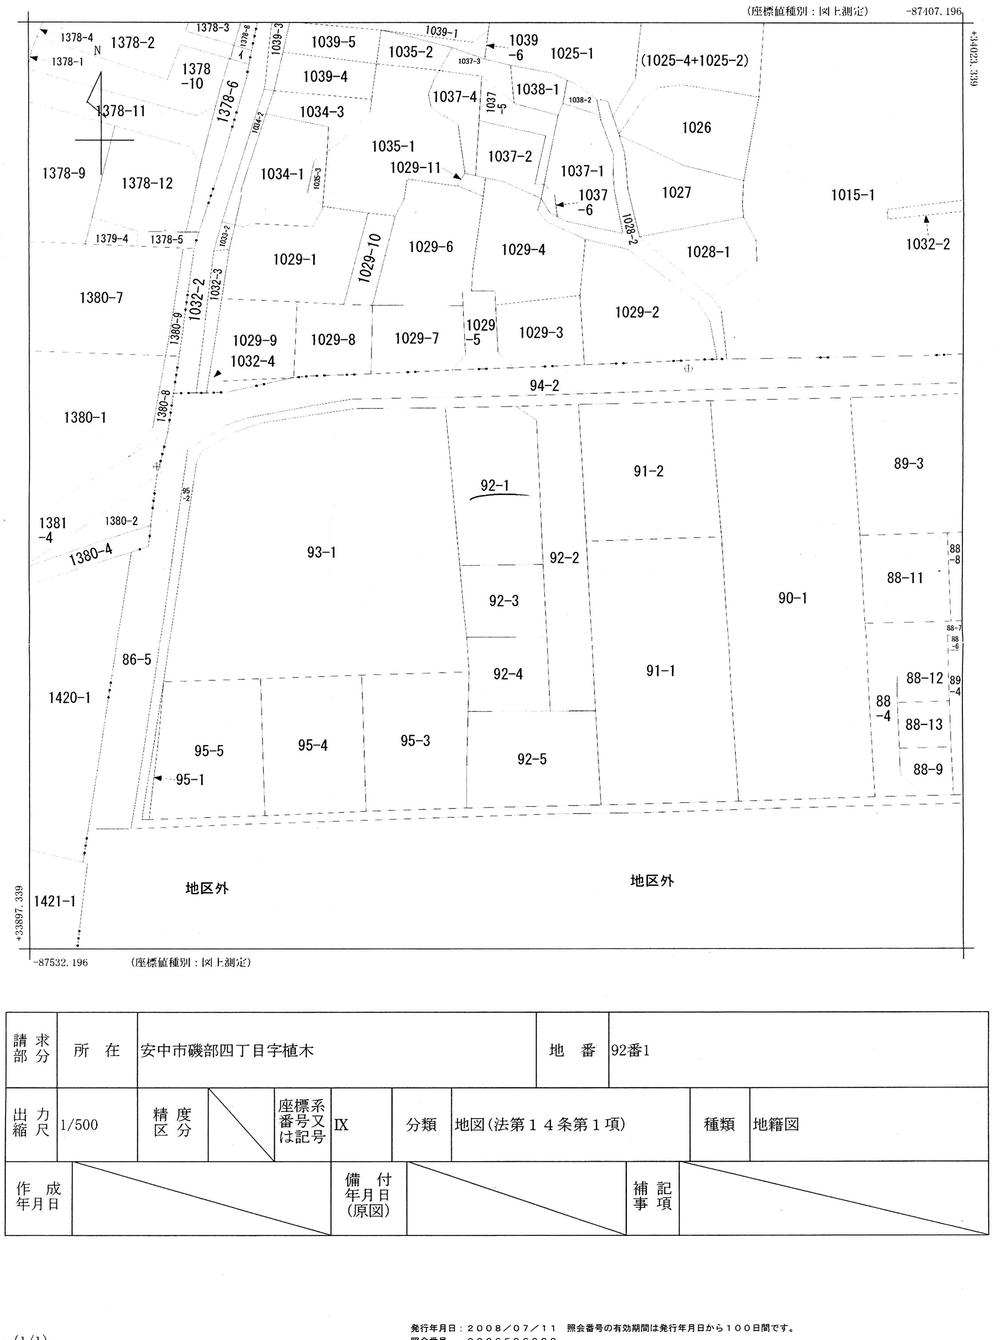 Compartment figure. Land price 5 million yen, Land area 209.08 sq m site (02 May 2013) Shooting